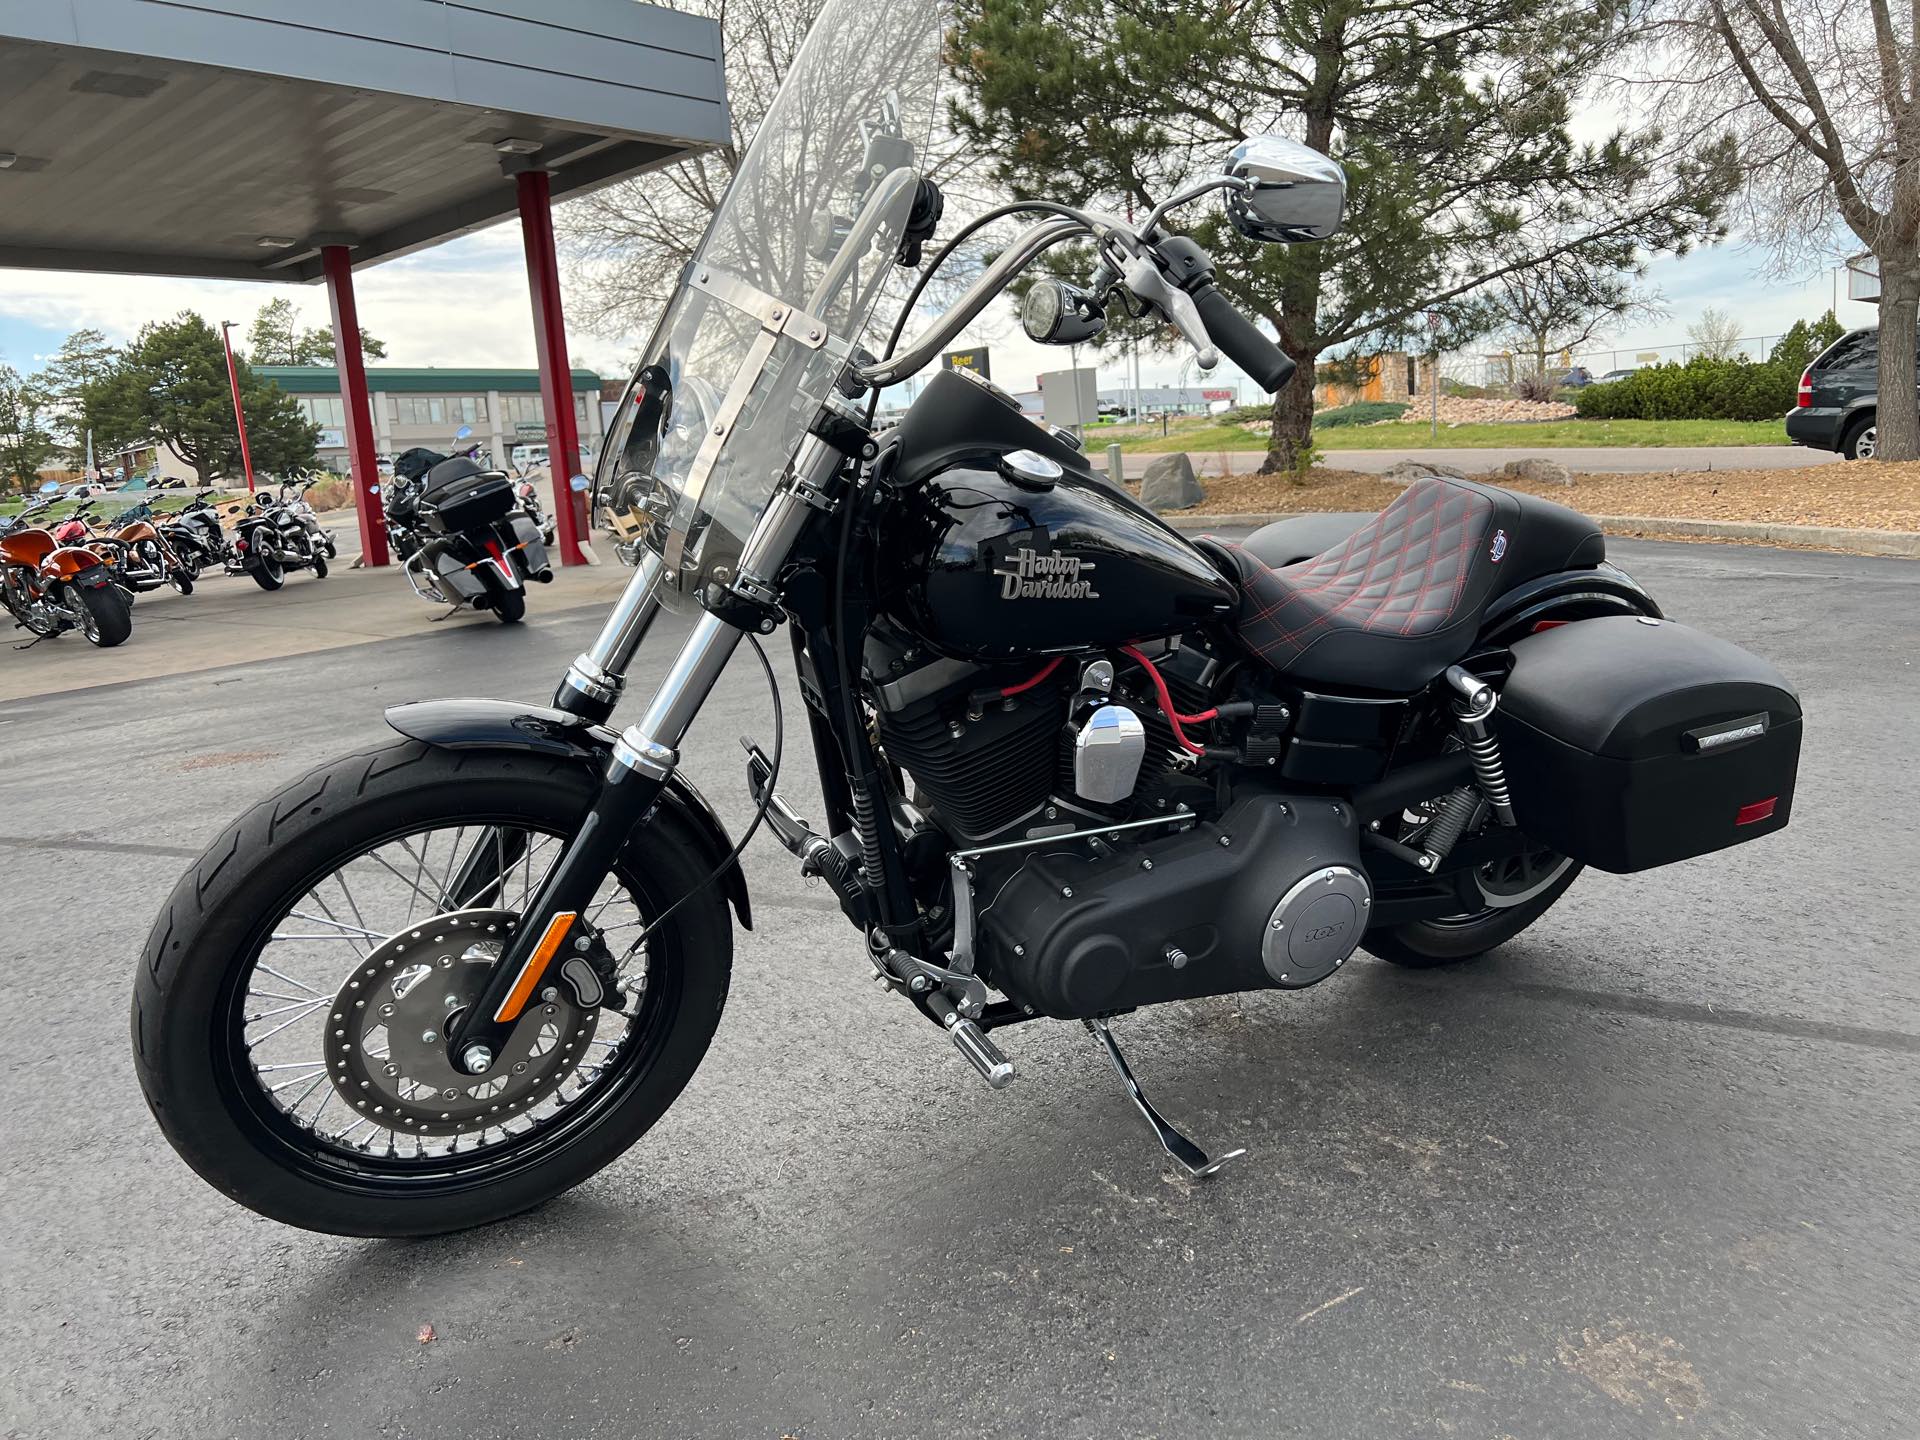 2014 Harley-Davidson Dyna Street Bob at Aces Motorcycles - Fort Collins